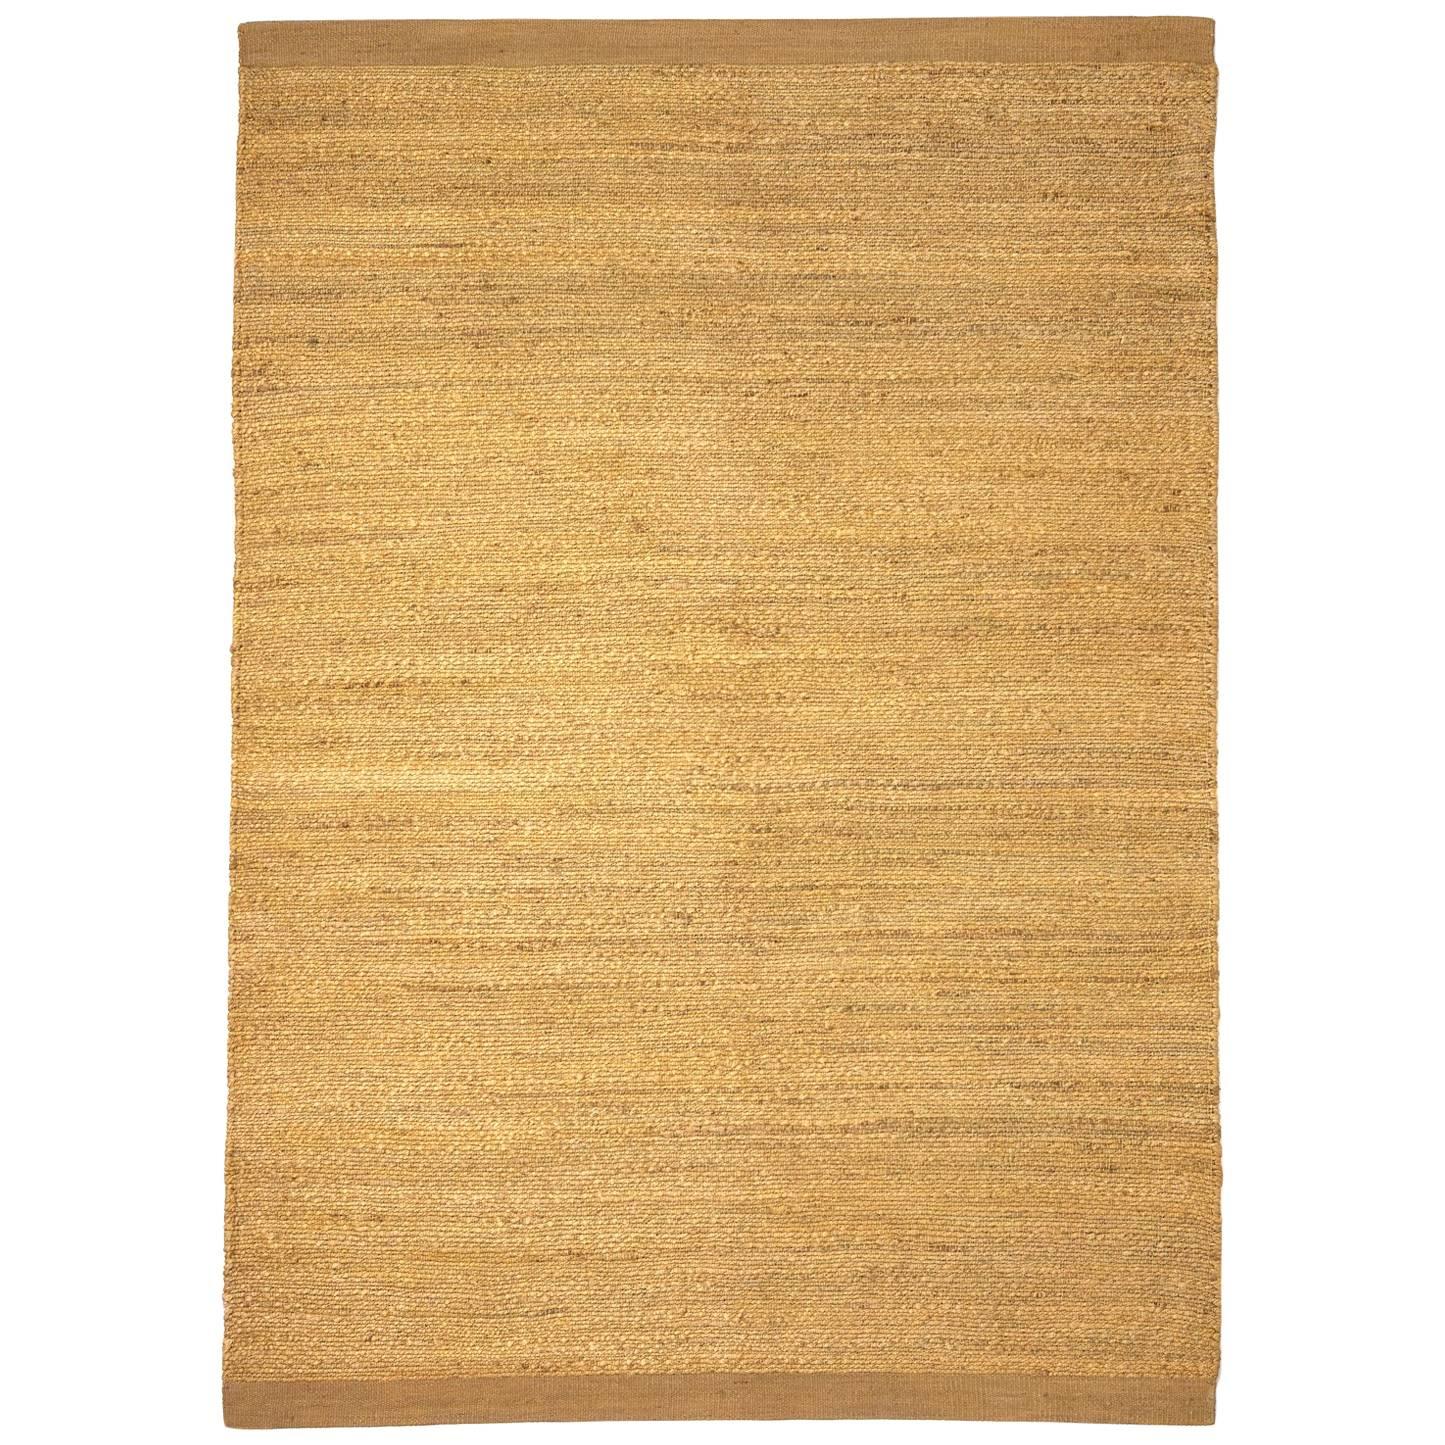 Hand-Loomed Herb Rug by Nani Marquina in Yellow, Medium